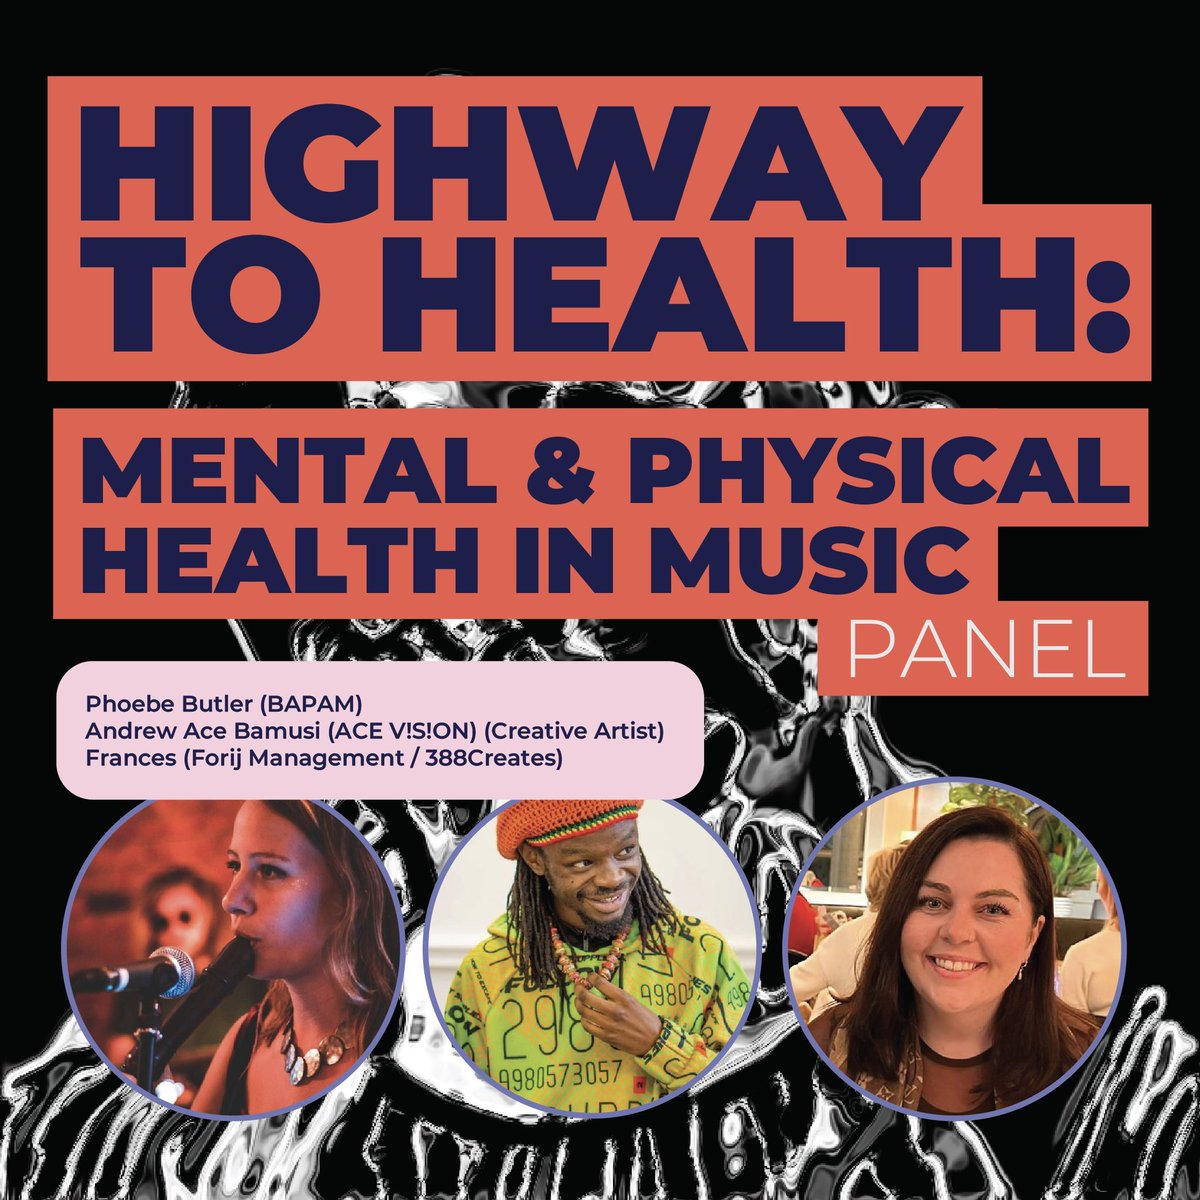 📣 Highway To Health: Mental & Physical Health In Music Speakers 👉 Phoebe Butler (@ukbapam), Andrew Ace Bamusi (ACE V!S!ON)(Creative Artist), Frances (Forij Management / 388Creates) View the full panel video on our YouTube now 👀 wide.ink/OTR24HEALTH